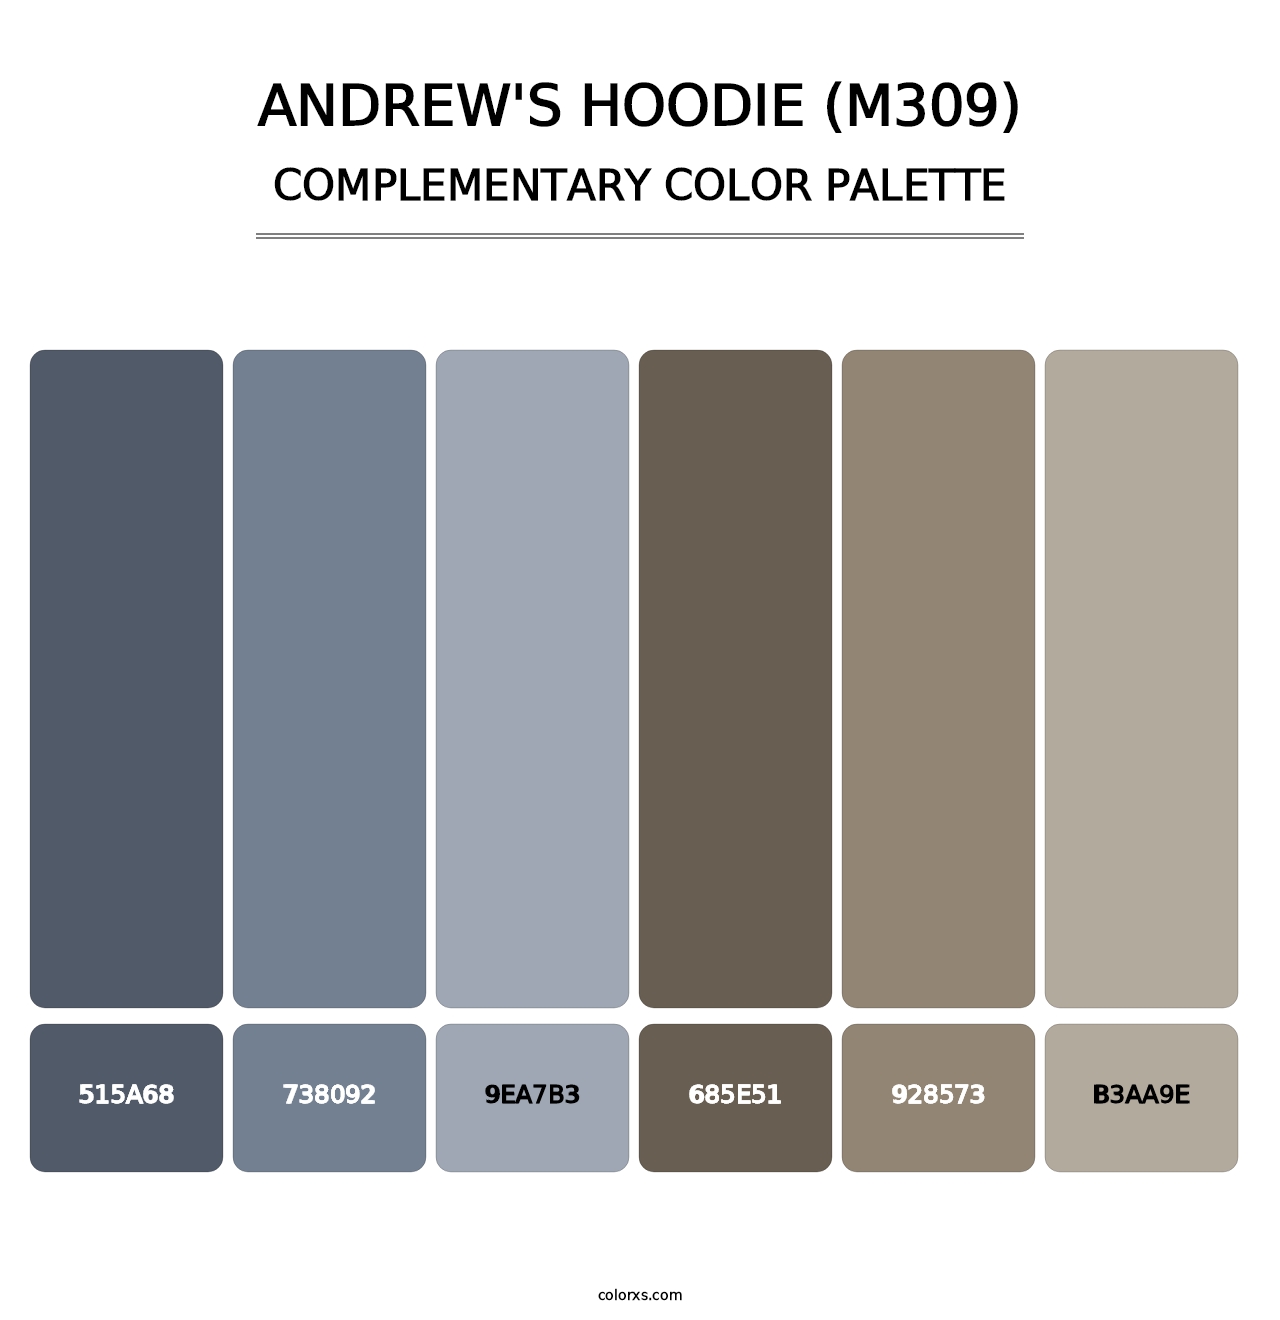 Andrew's Hoodie (M309) - Complementary Color Palette